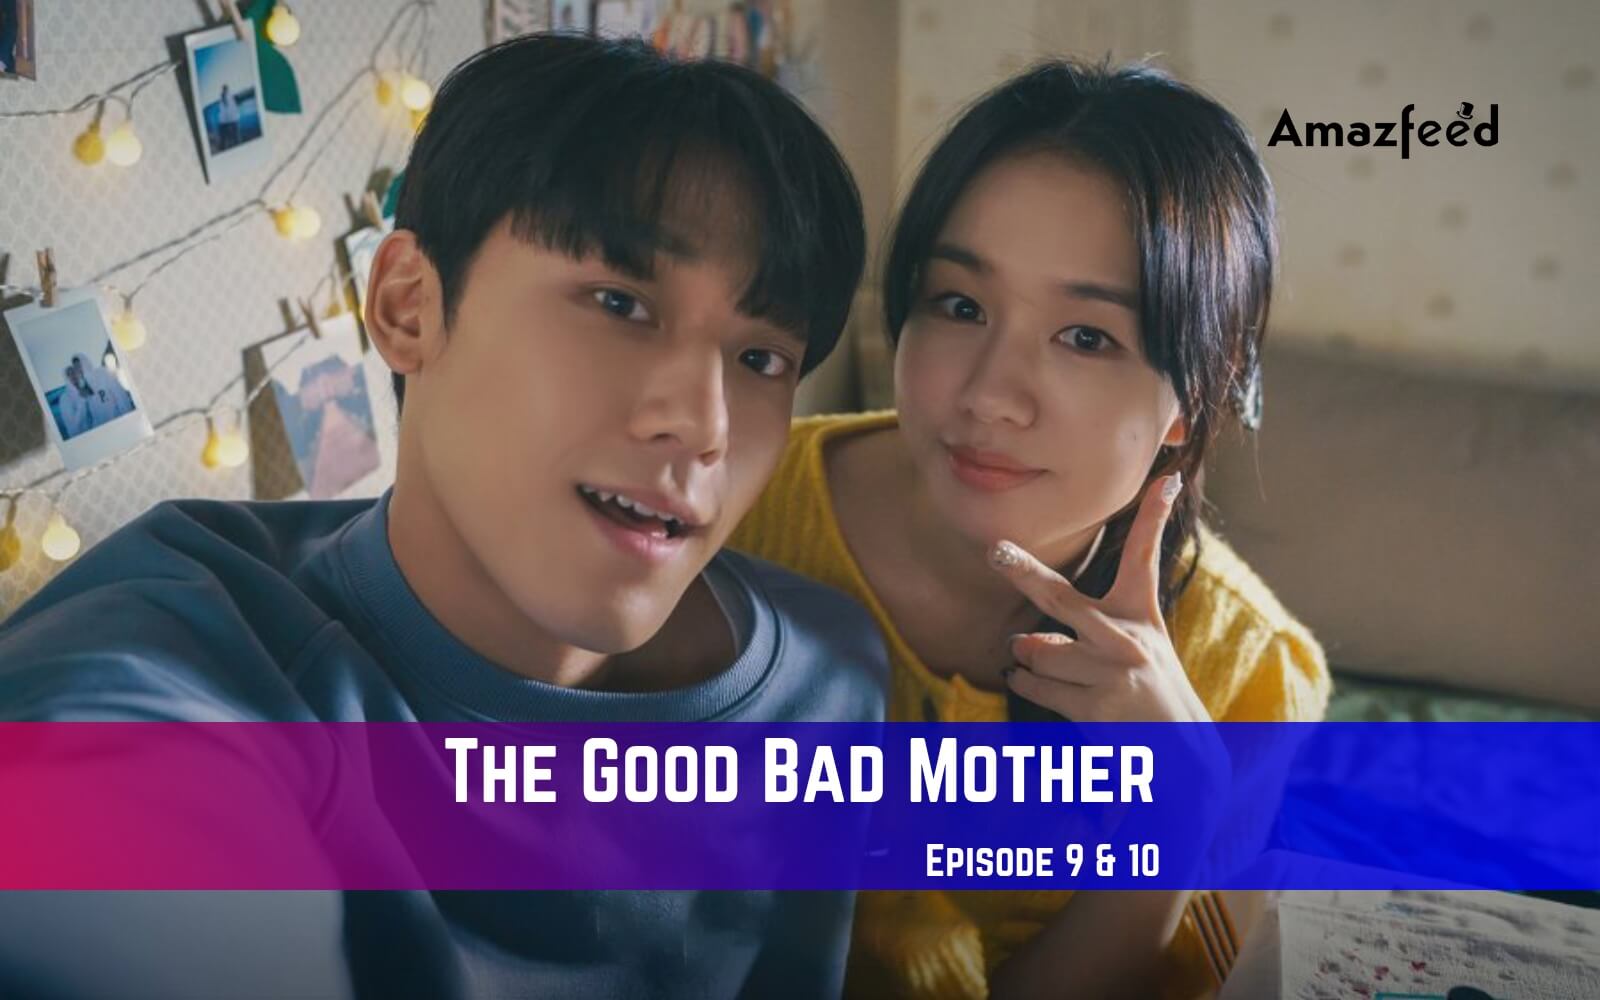 the good bad mother episode 9 release date